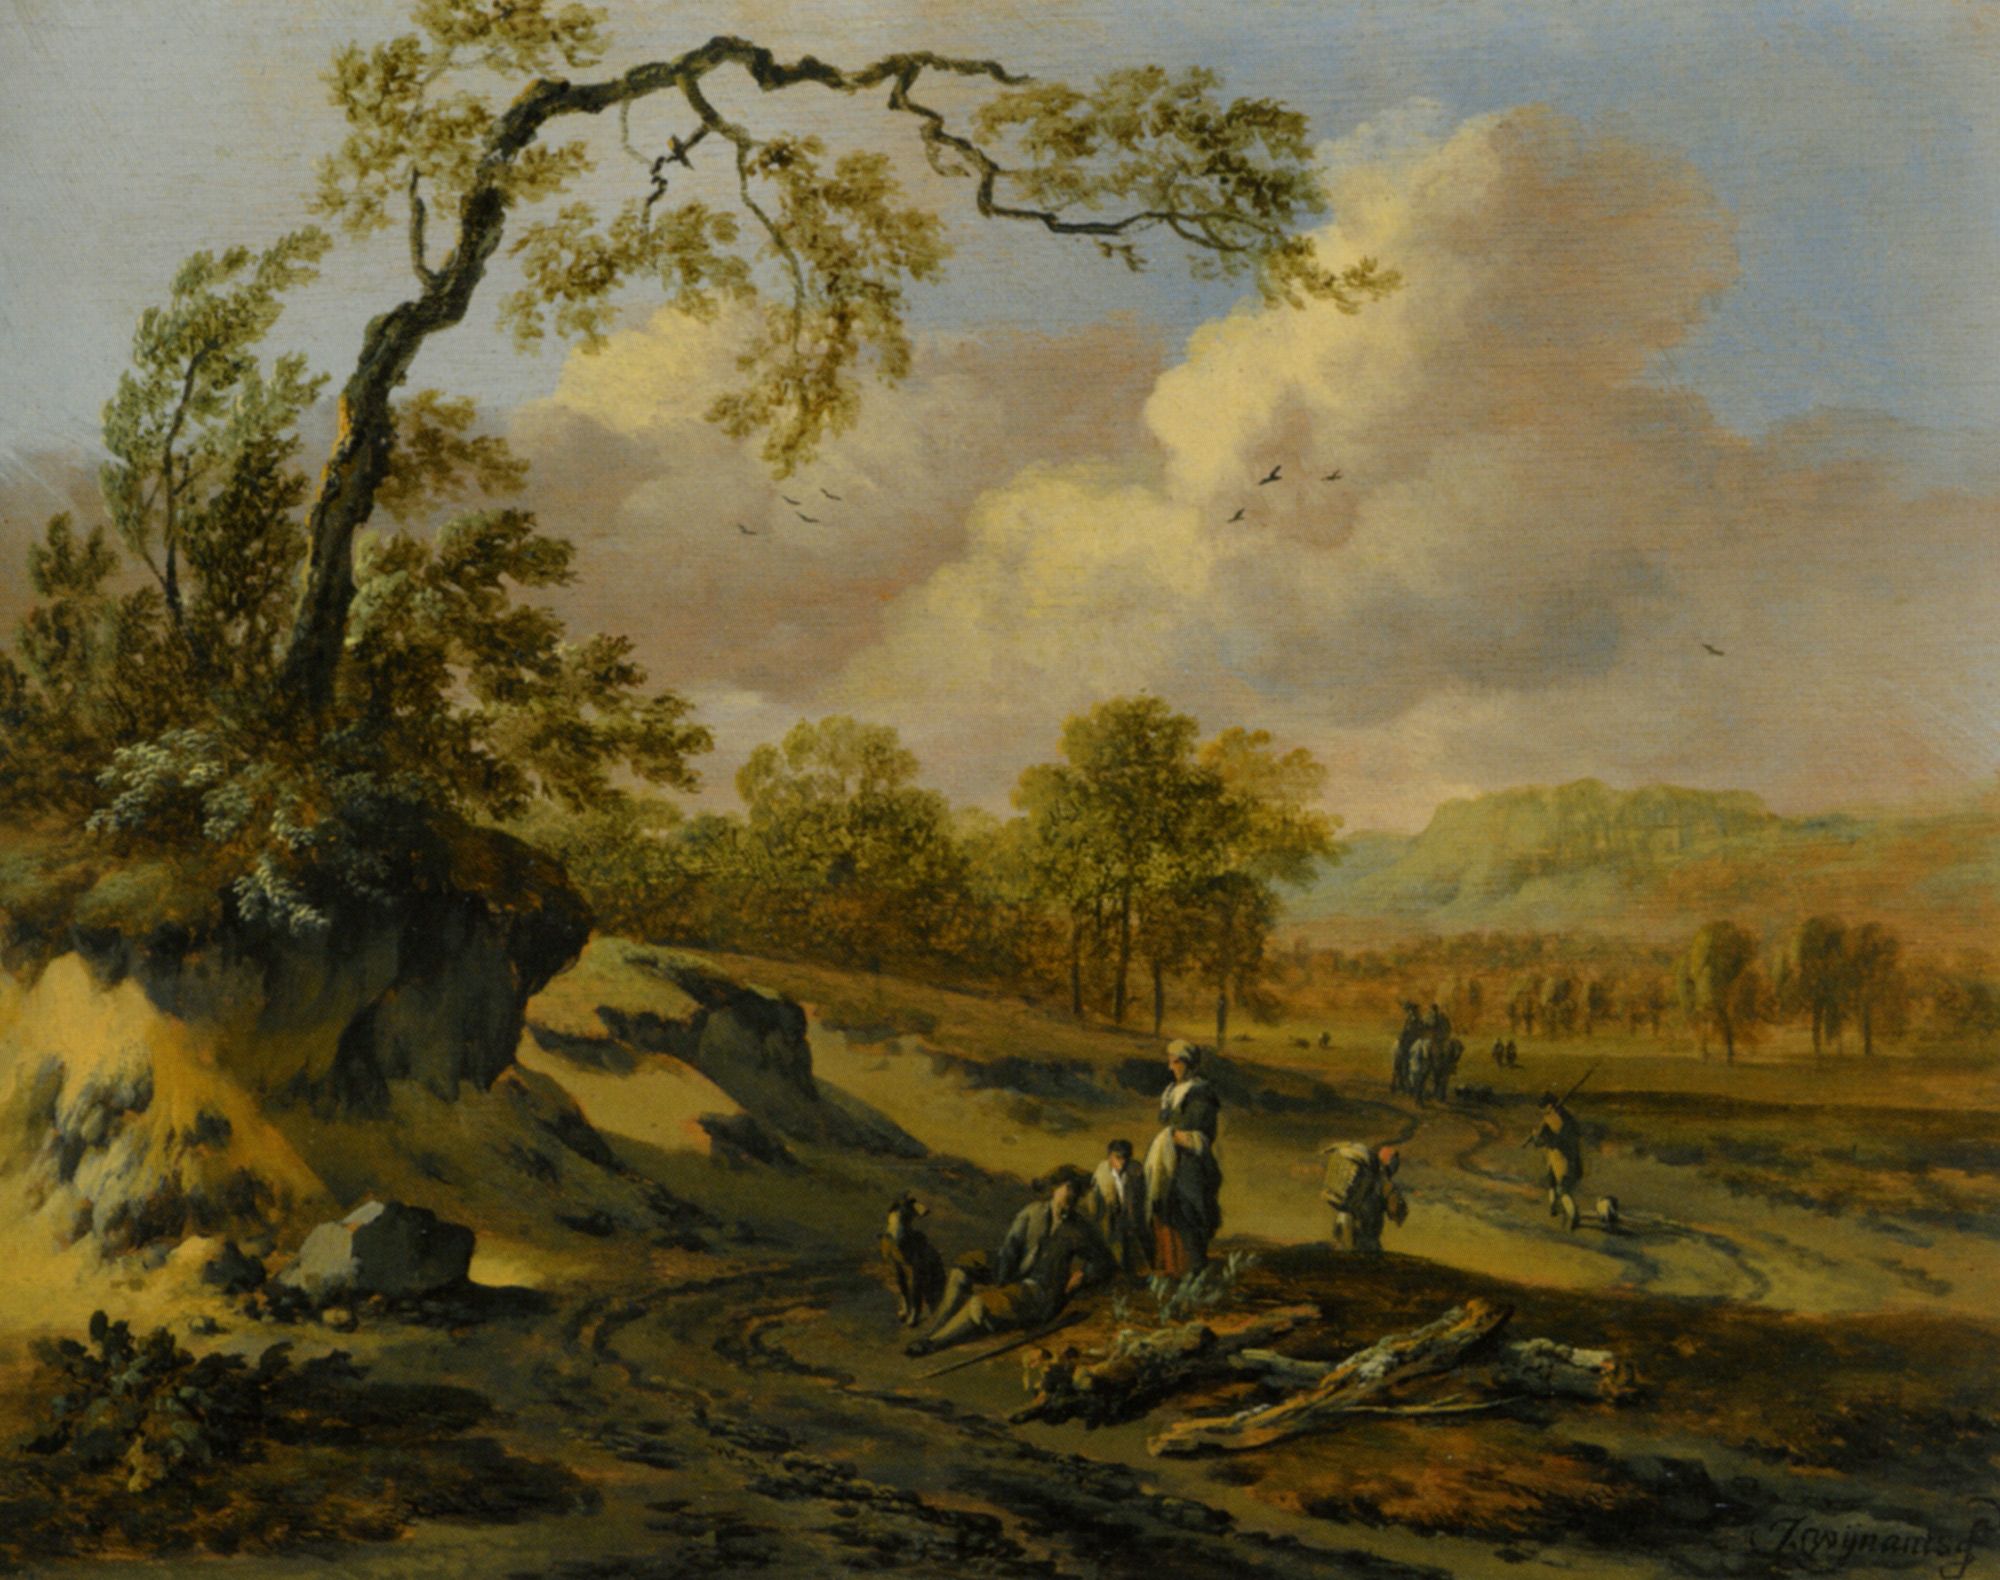 Landscape with Travellers by Jan Wijnants